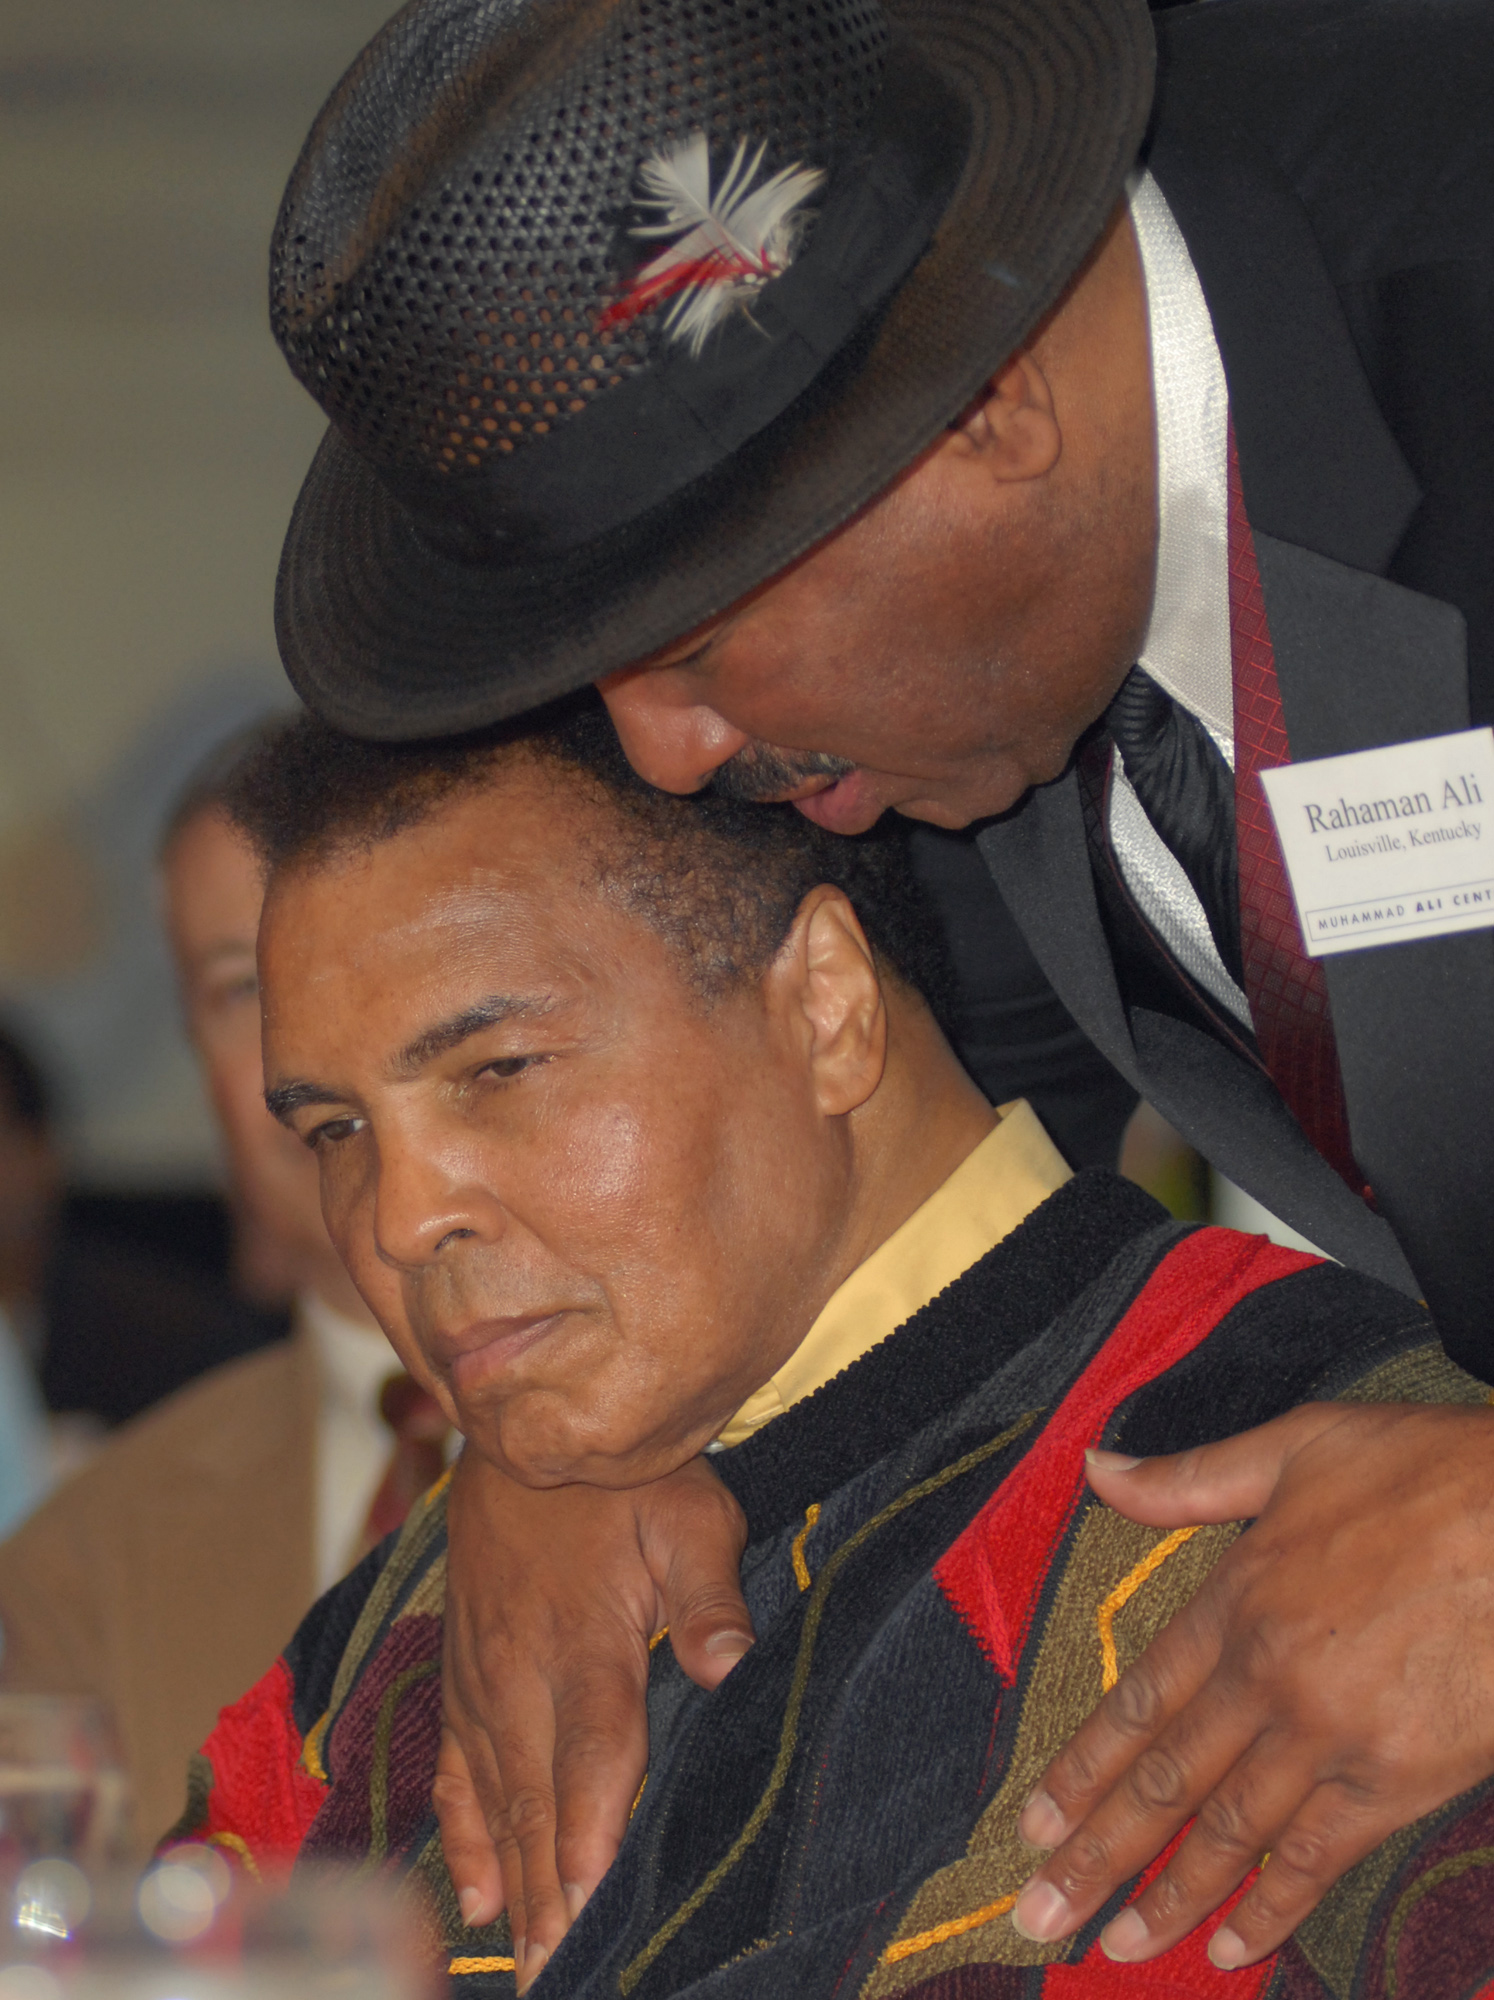 PHOTO: Rahaman Ali wishes his  brother, Muhammad Ali, a happy birthday, March 18, 2007, in Louisville, Ky., at the Muhammad Ali Center.